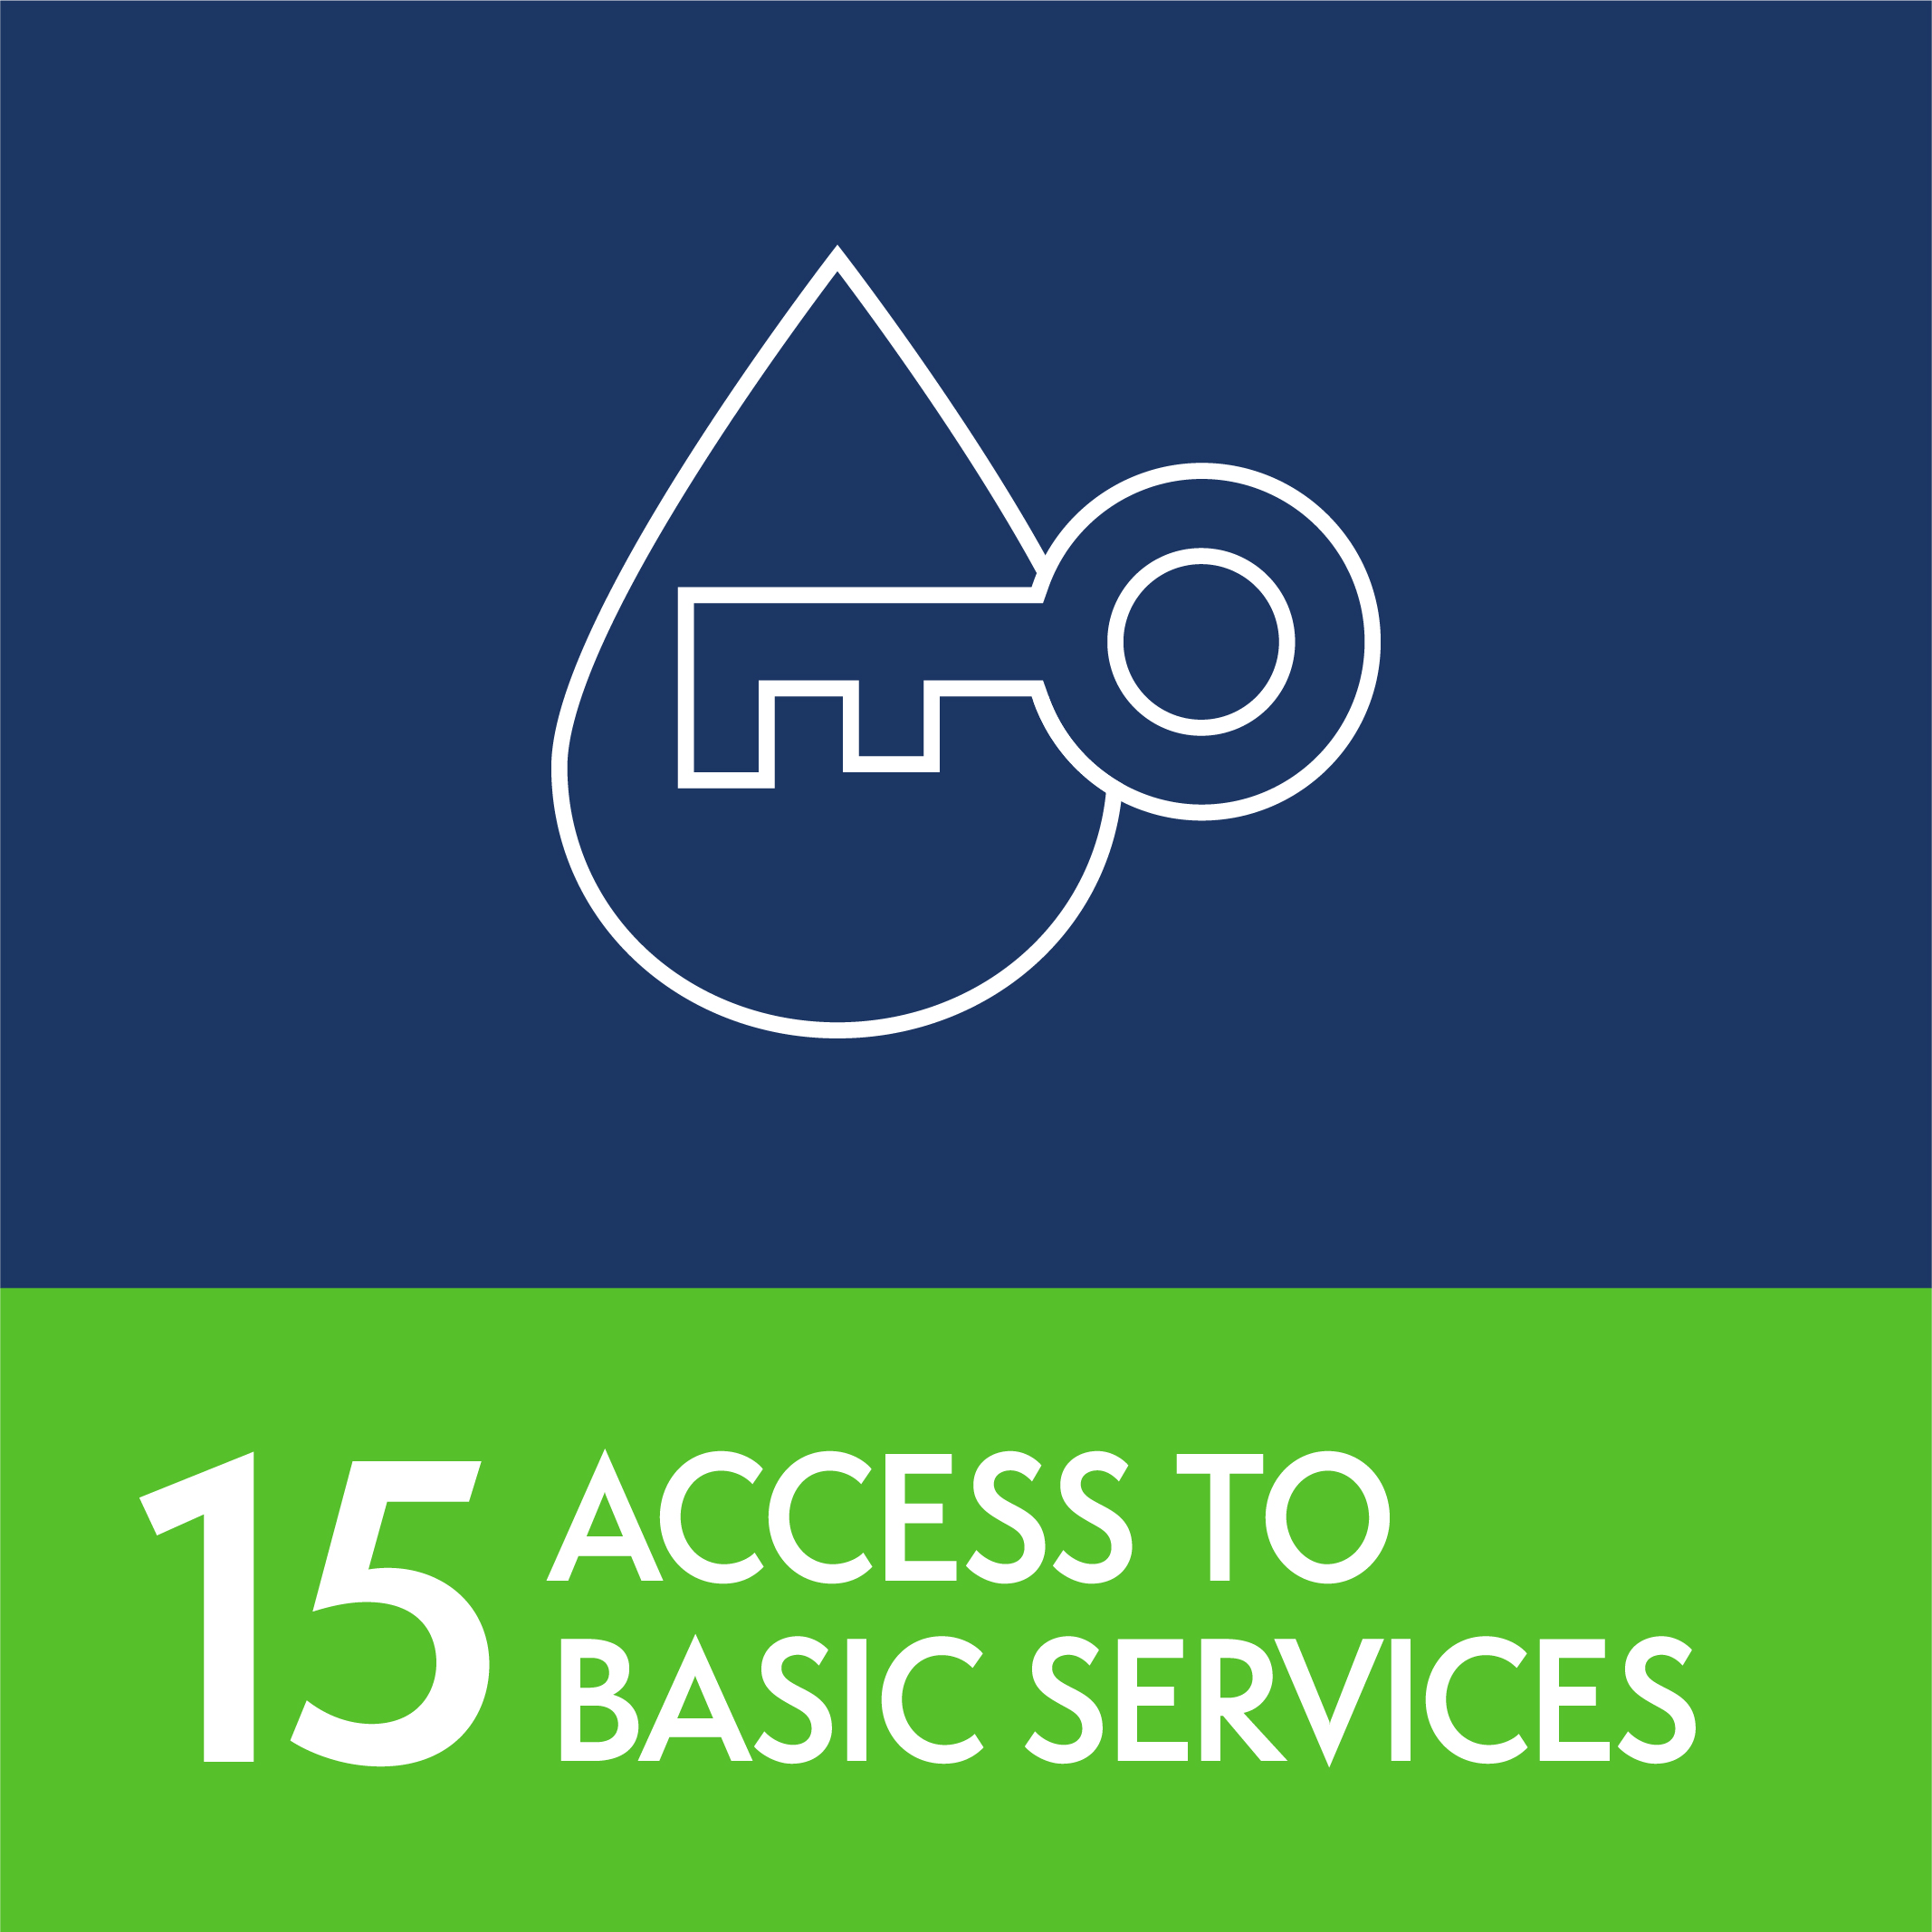 15 - Access to basic services